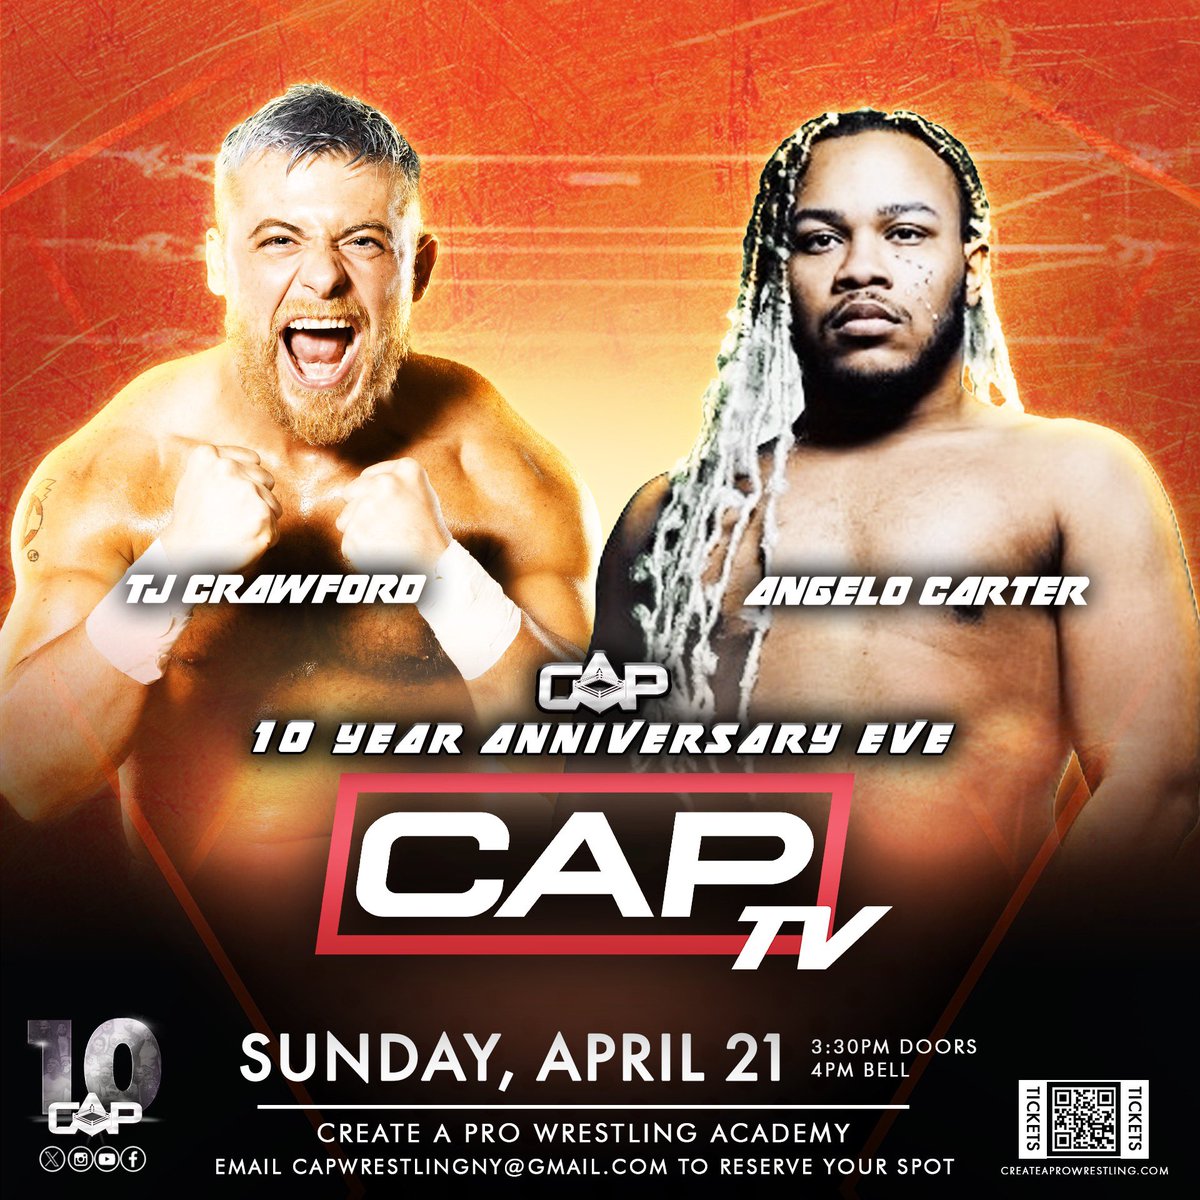 🚨MATCH ANNOUNCEMENT🚨 They both asked for it and got it THIS SUNDAY Angelo Carter goes 1 on 1 with TJ Crawford! With the CAP 10 Year Anniversary Super Show less than a month away, both competitors are looking to make a statement Limited seats remain! 🎟EMAIL TO RESERVE🎟